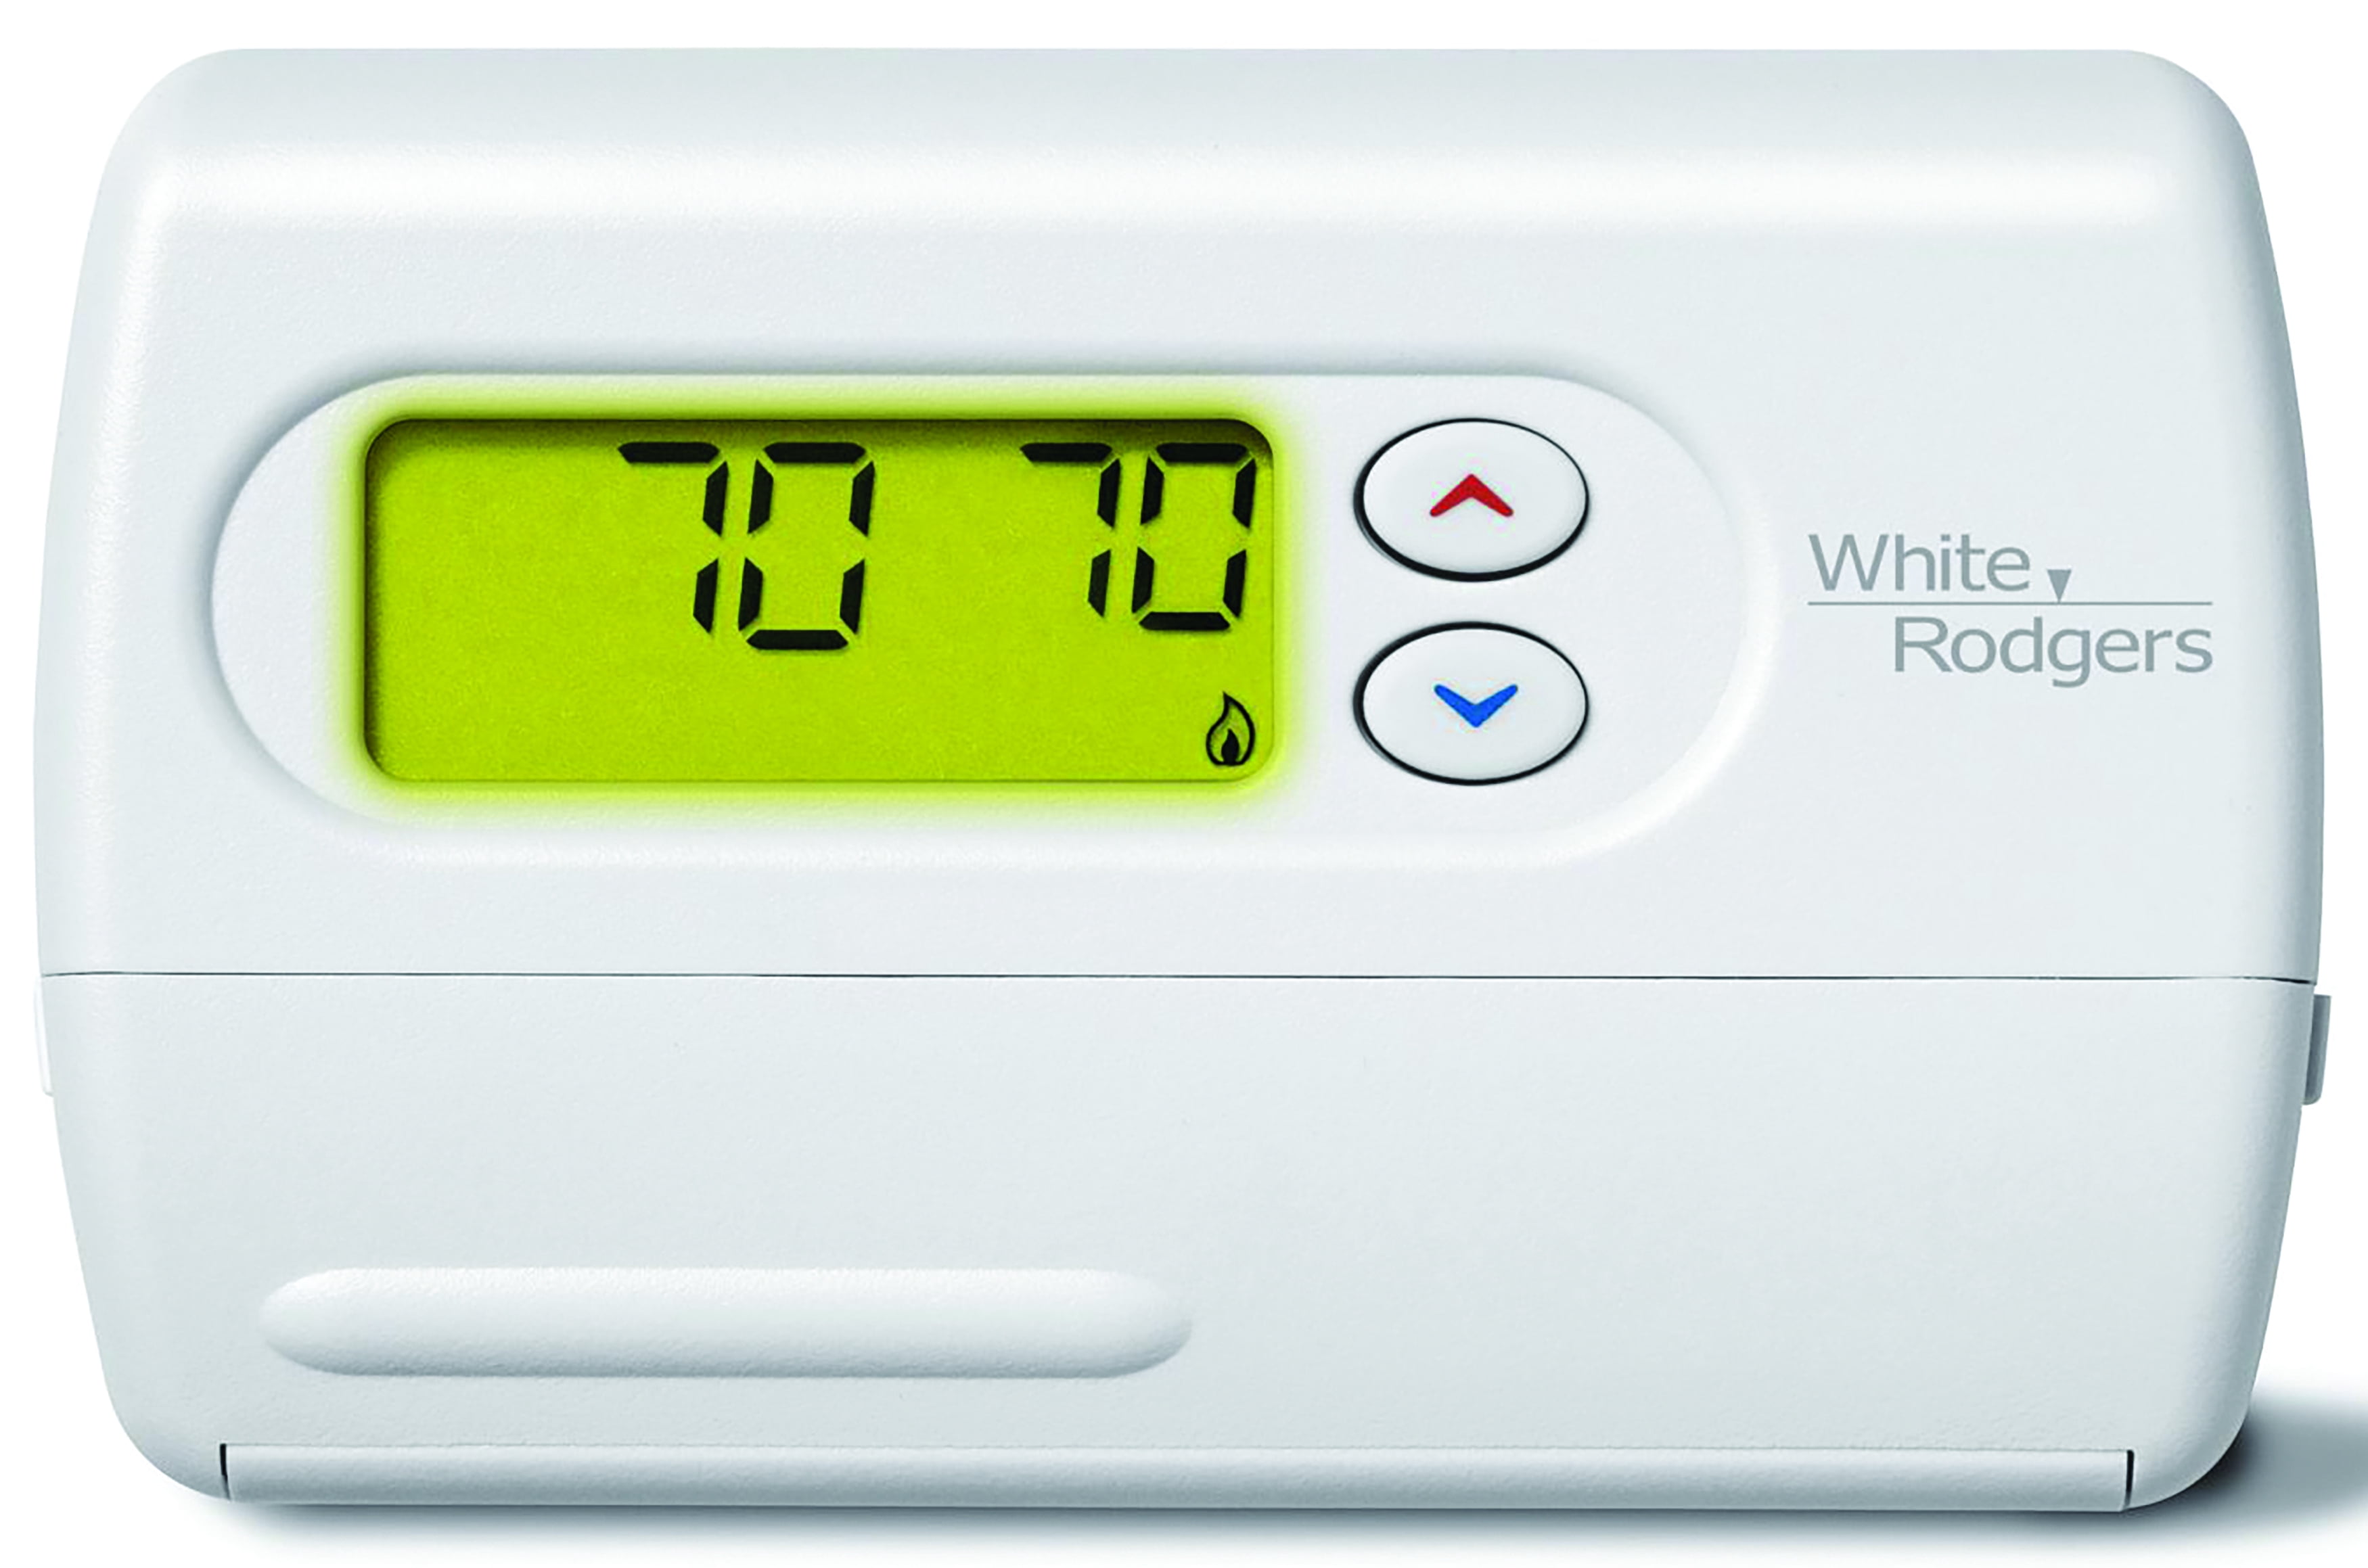 How To Change Battery On Thermostat White Rodgers How To Change Battery In White Rodgers Thermostat